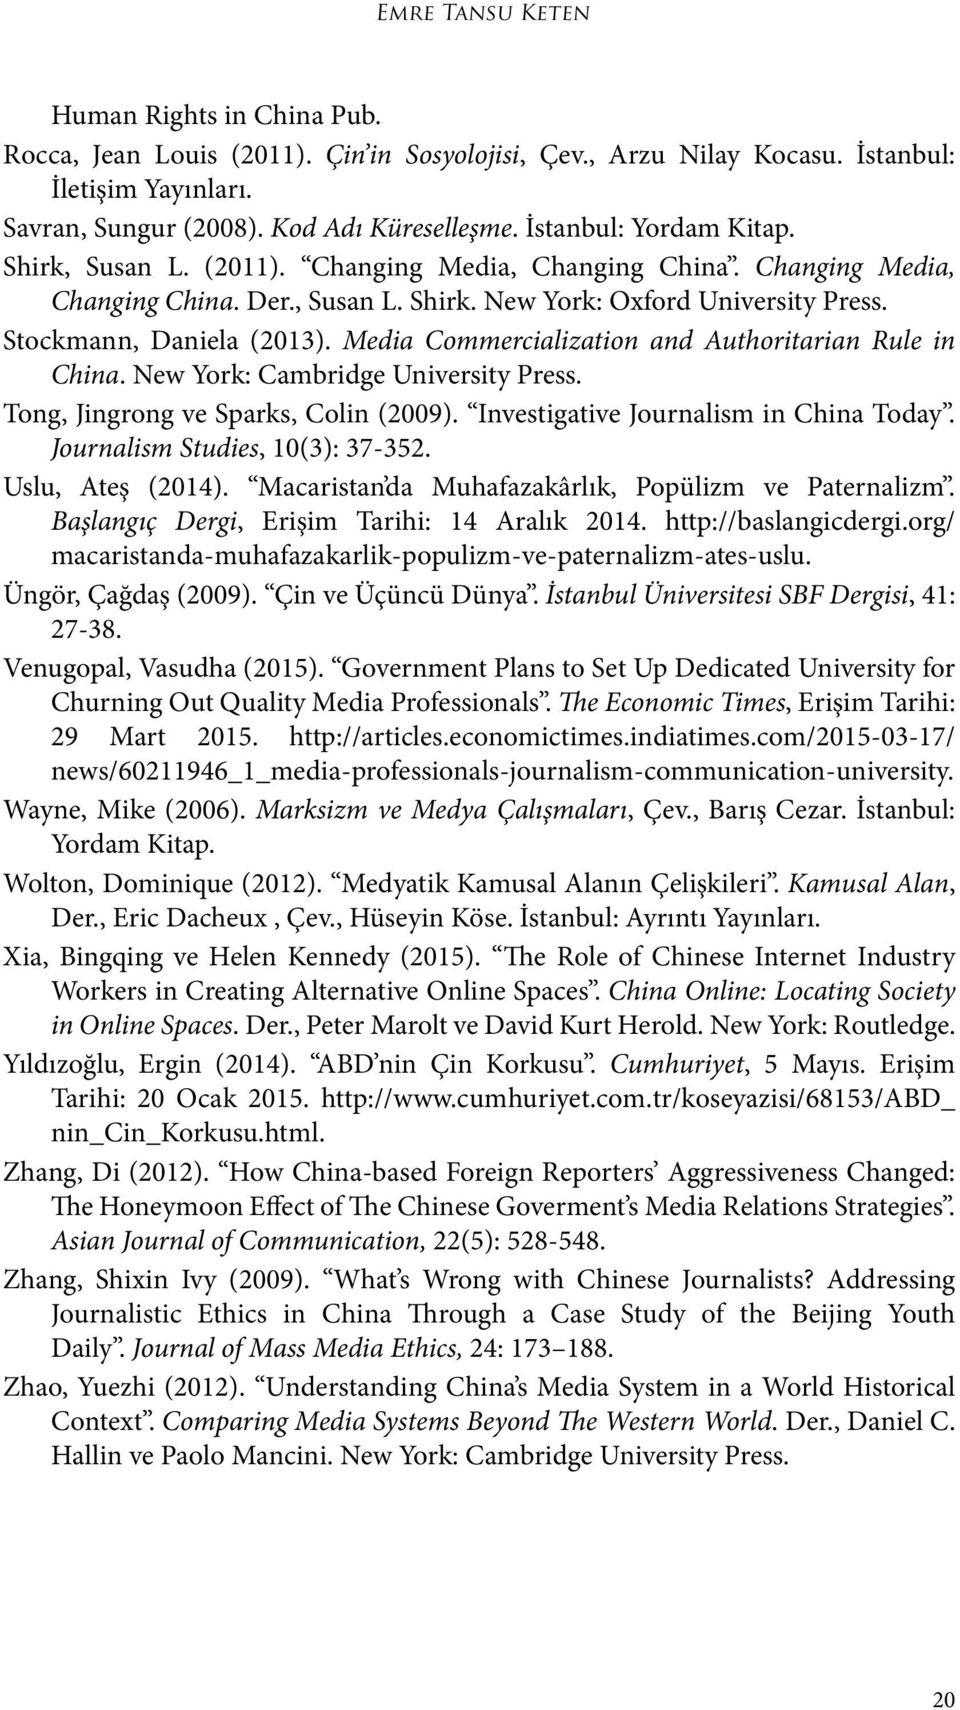 Media Commercialization and Authoritarian Rule in China. New York: Cambridge University Press. Tong, Jingrong ve Sparks, Colin (2009). Investigative Journalism in China Today.